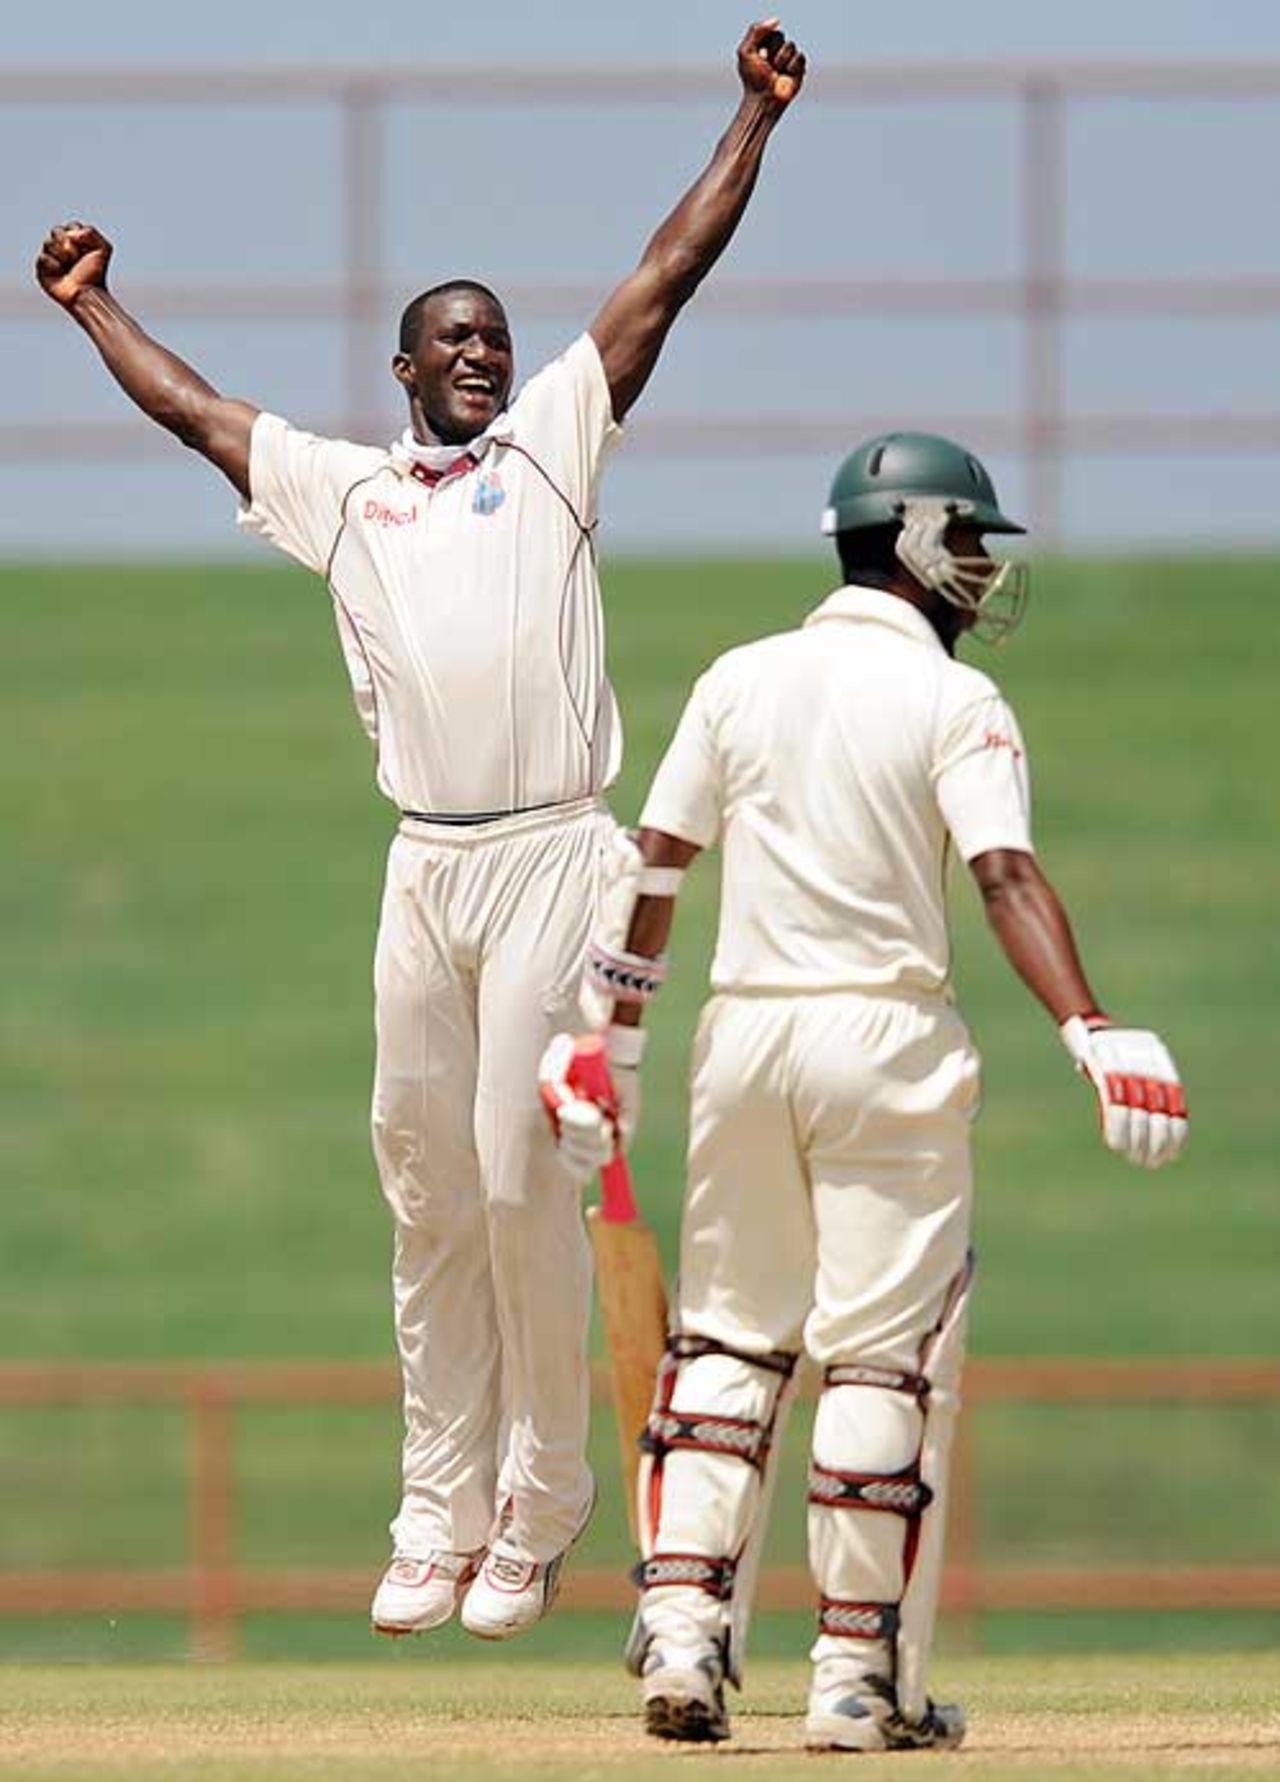 Darren Sammy celebrates a wicket during a lethal spell, West Indies v Bangladesh, 1st Test, Kingstown, 5th day, July 13, 2009